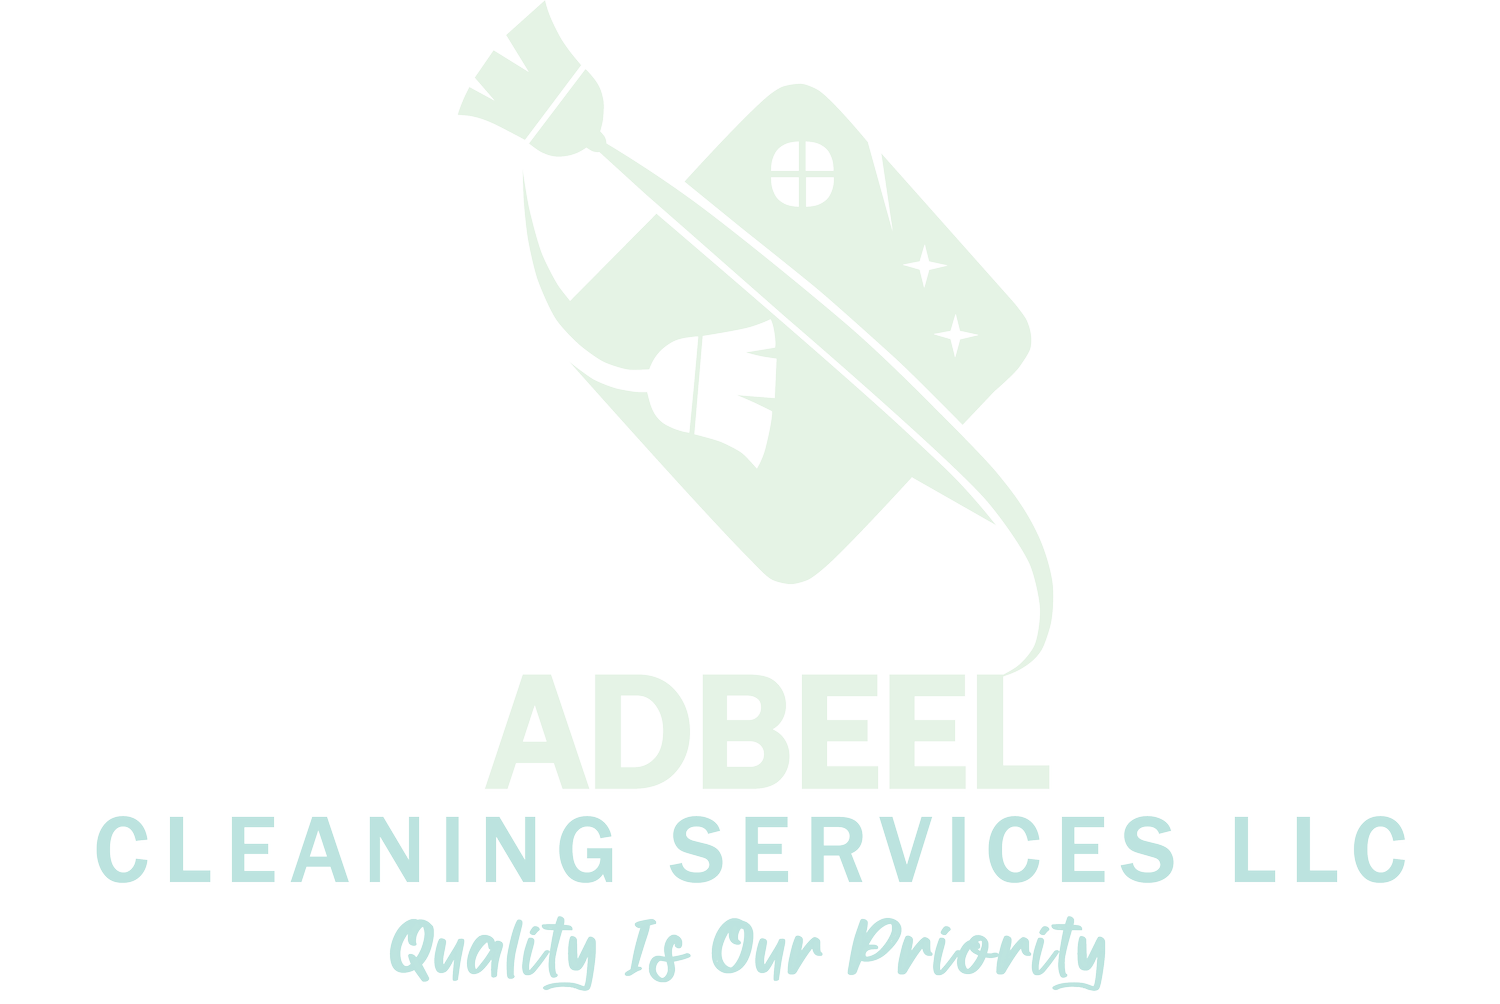 ADBEEL Cleaning Services